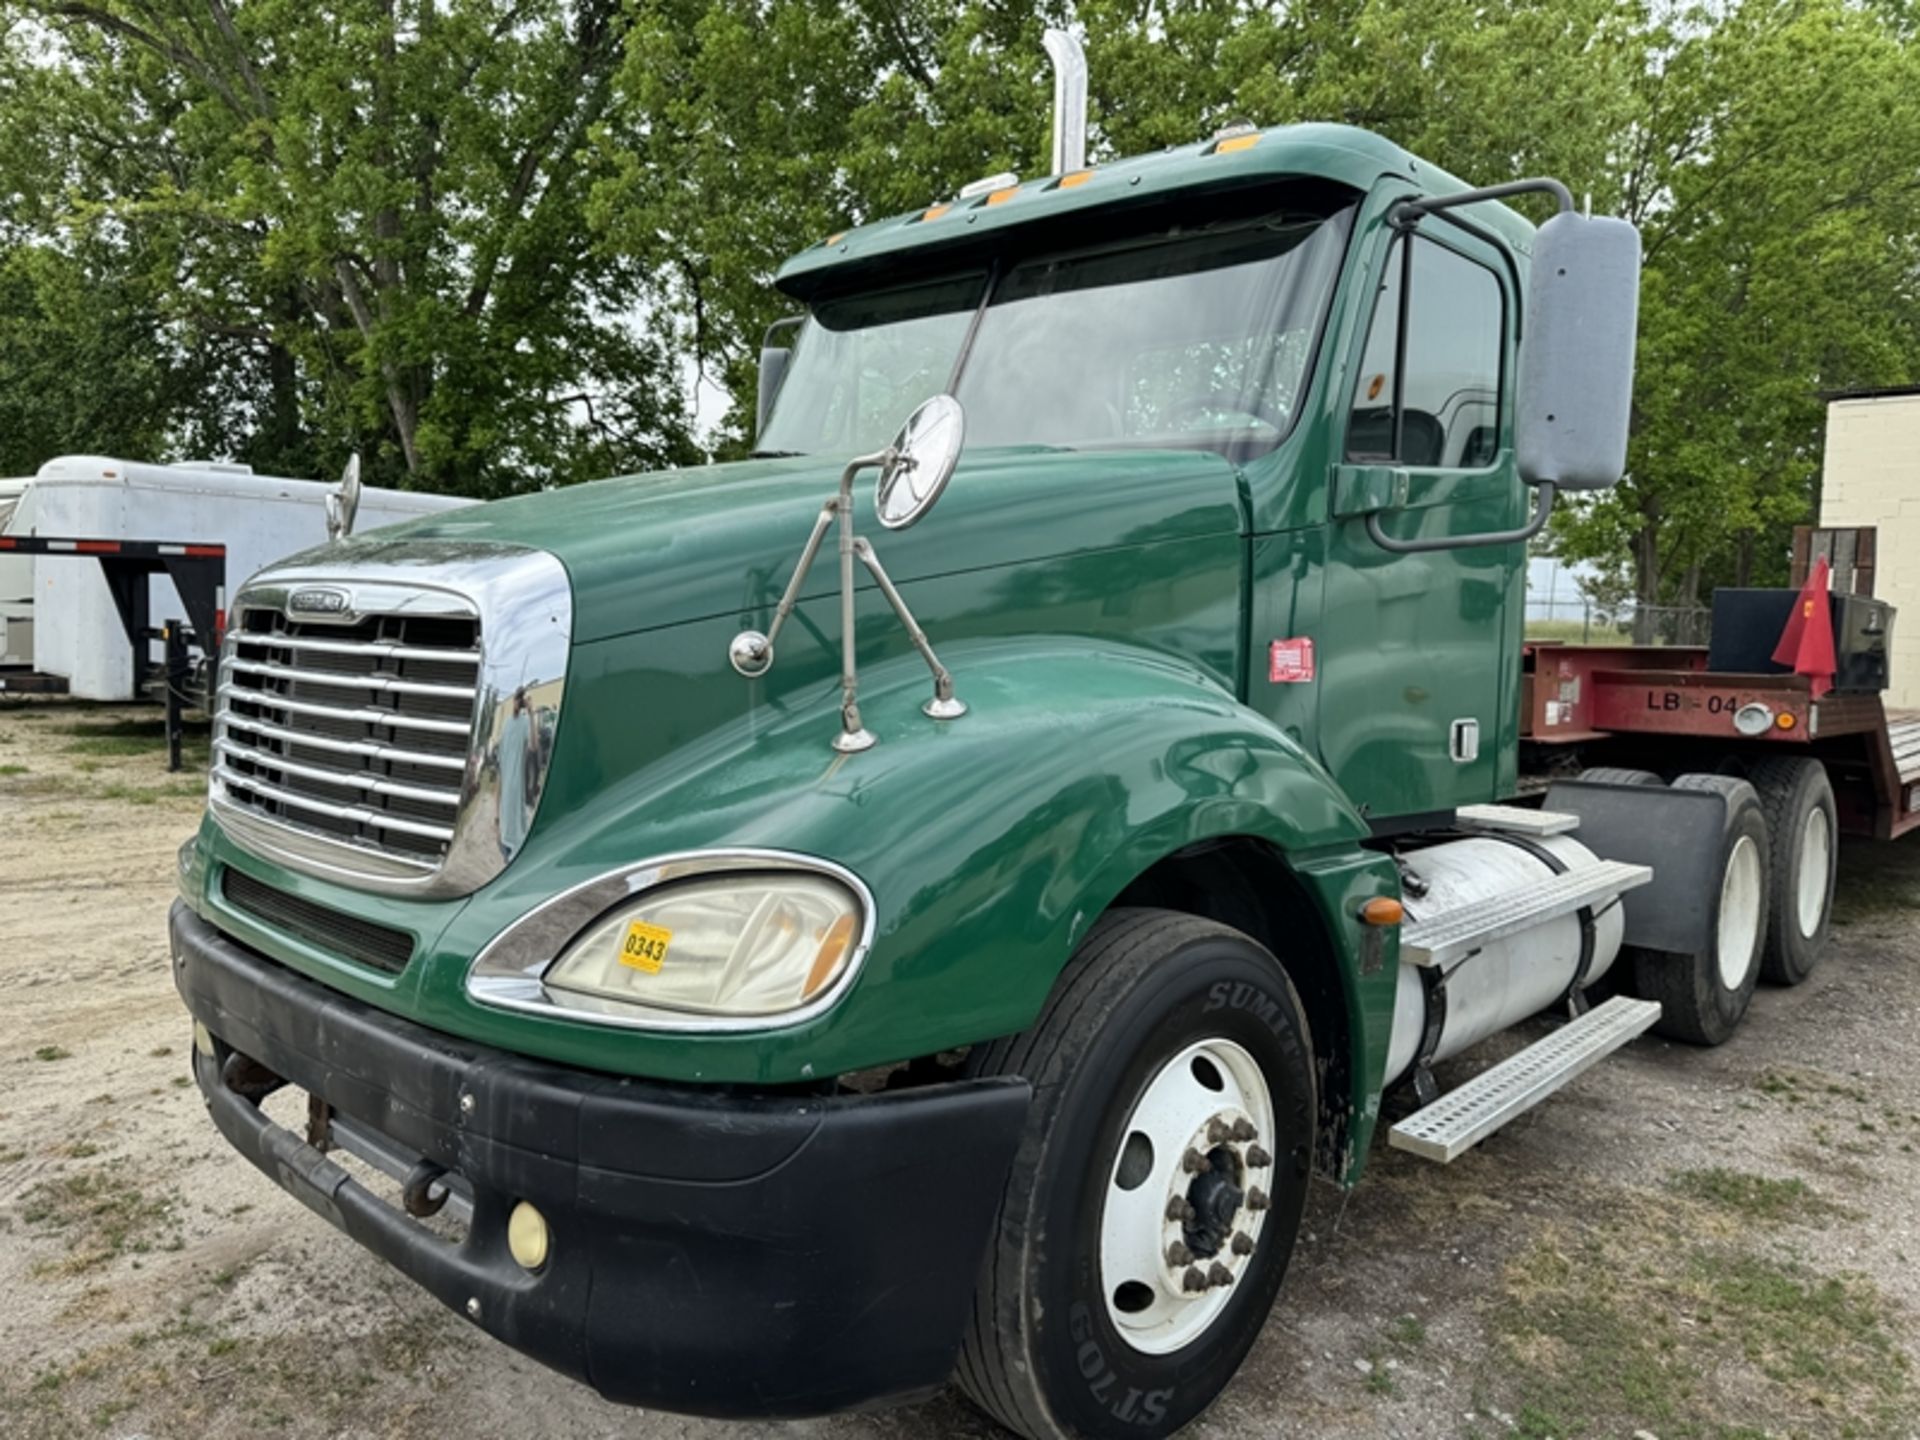 2006 FREIGHTLINER Columbia daycab, Detroit 60 Series engine, 10 spd - 419,698 miles showing -